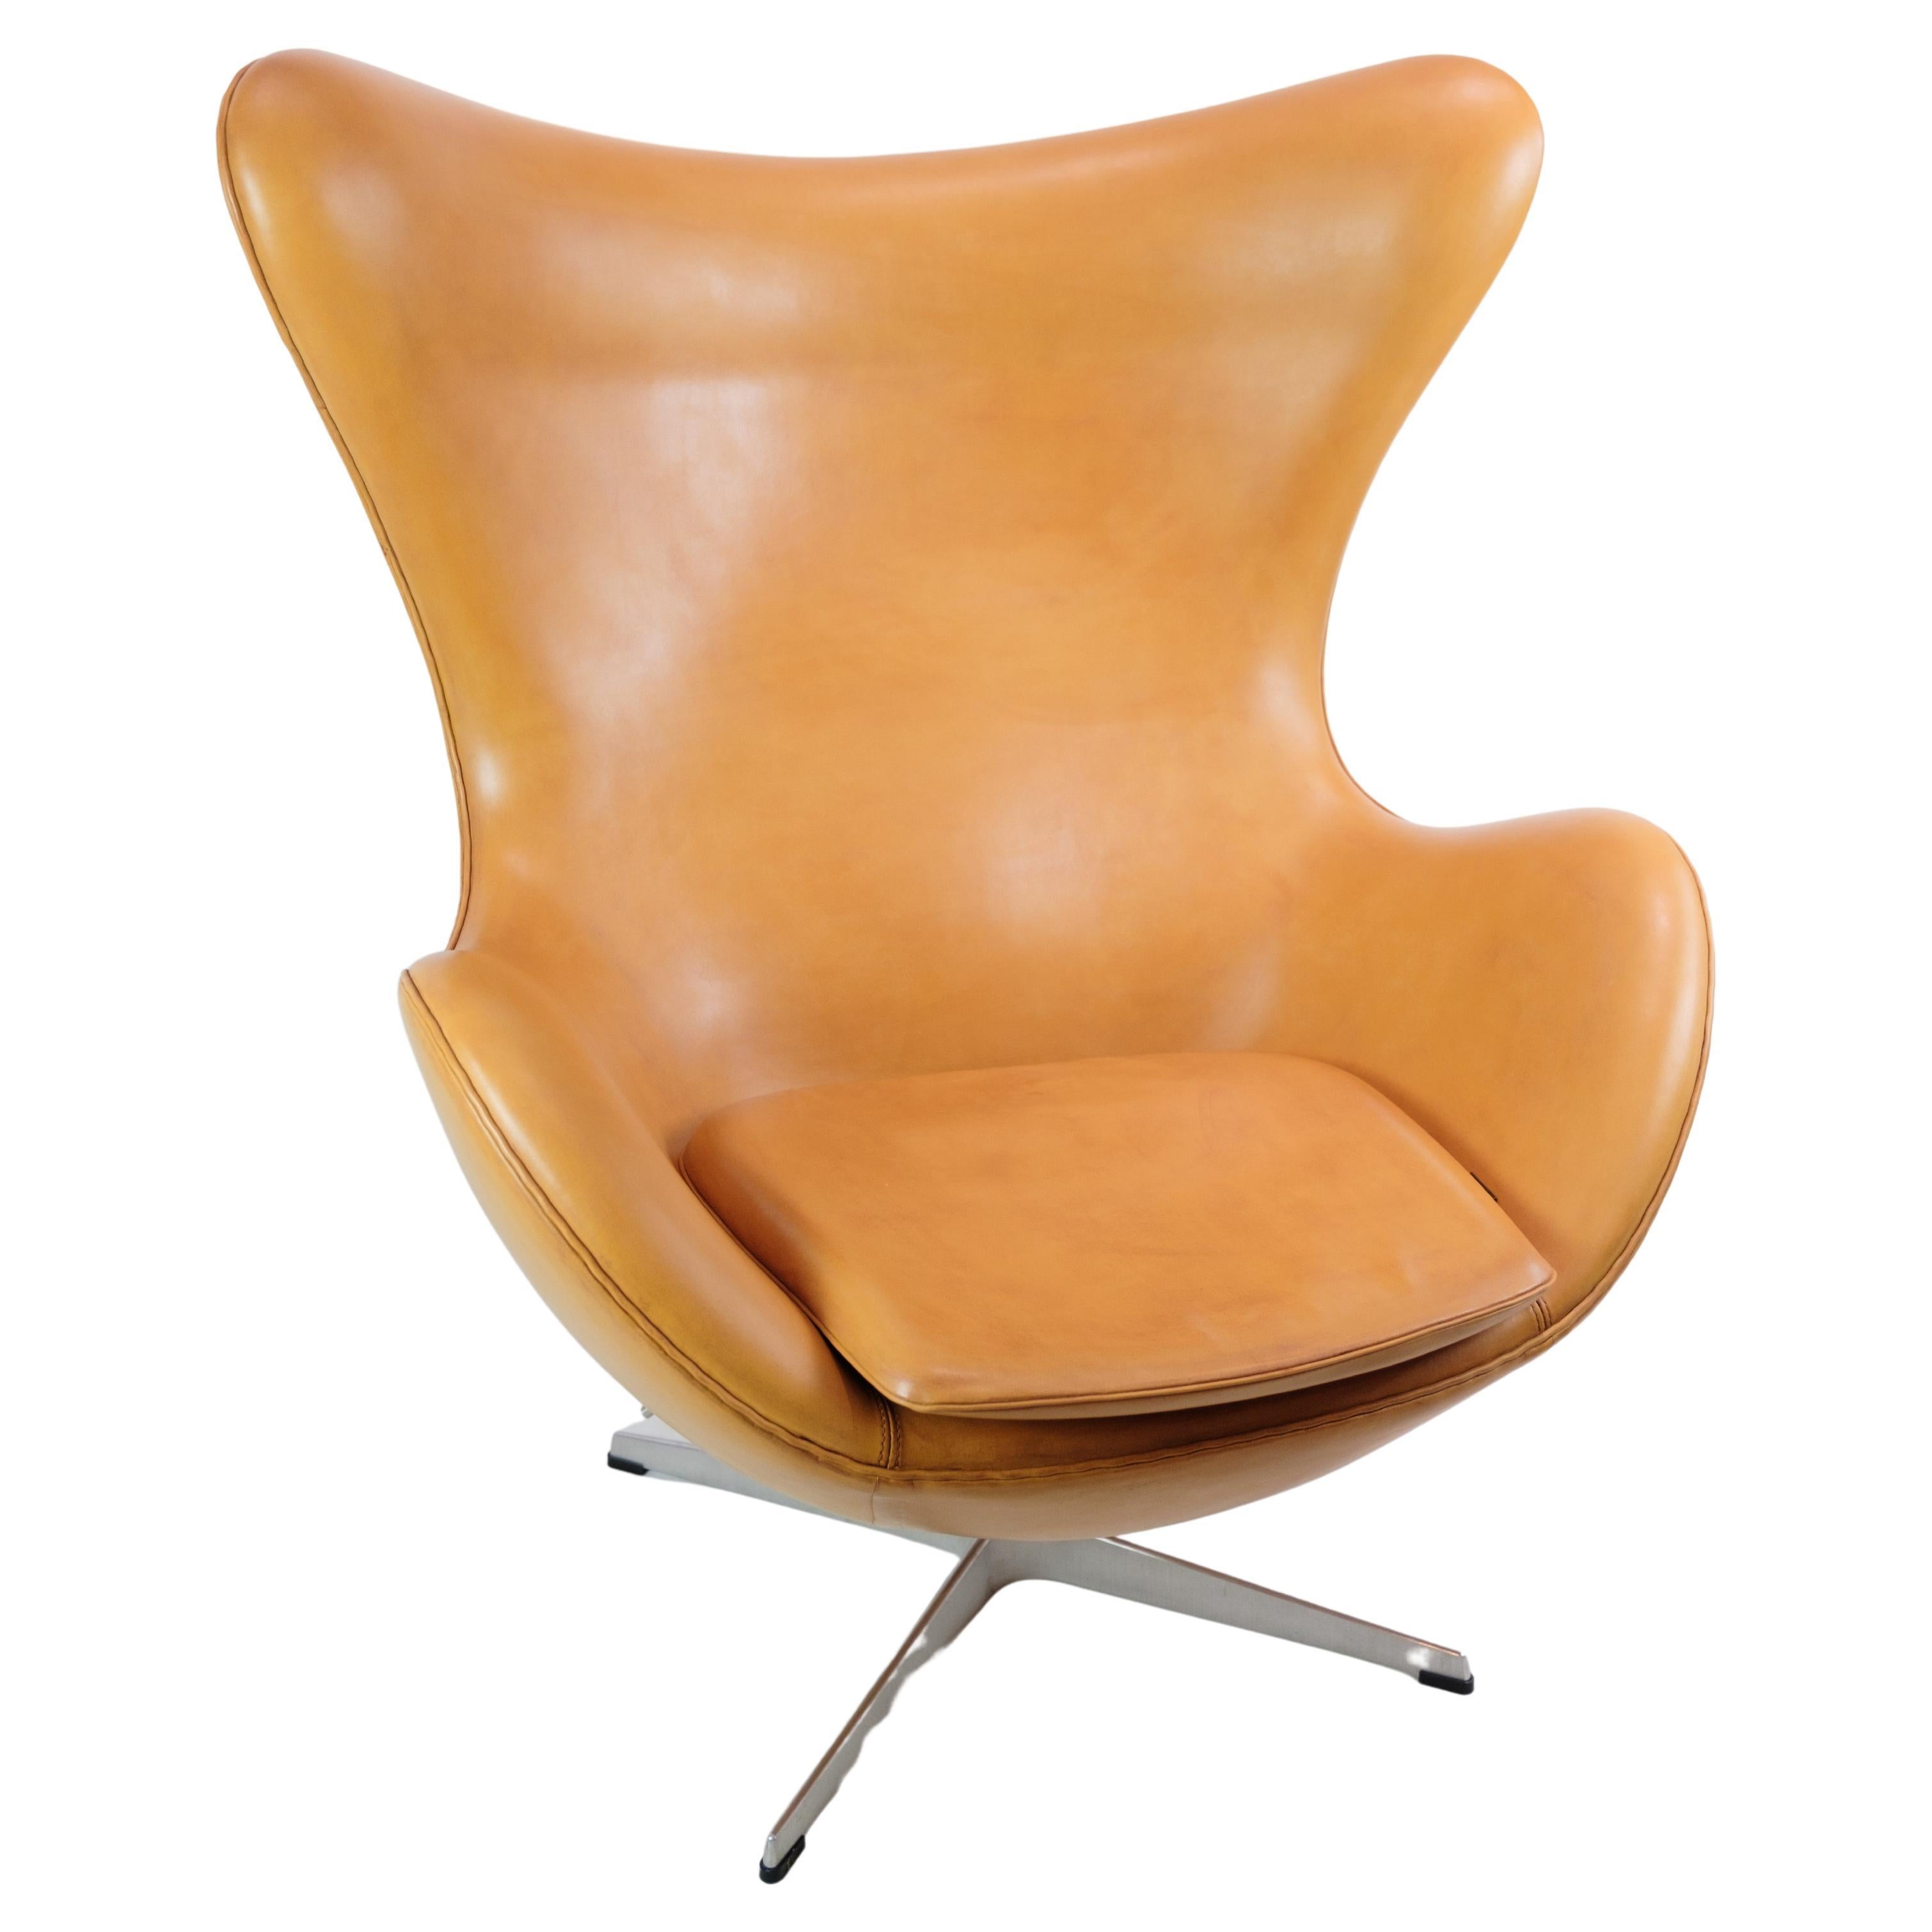 The egg, model 3316 designed by Arne Jacobsen in 1958. The chair has original upholstery in cognac elegance leather manufactored by Fritz Hansen 

This product will be inspected thoroughly at our professional workshop by our educated employees,